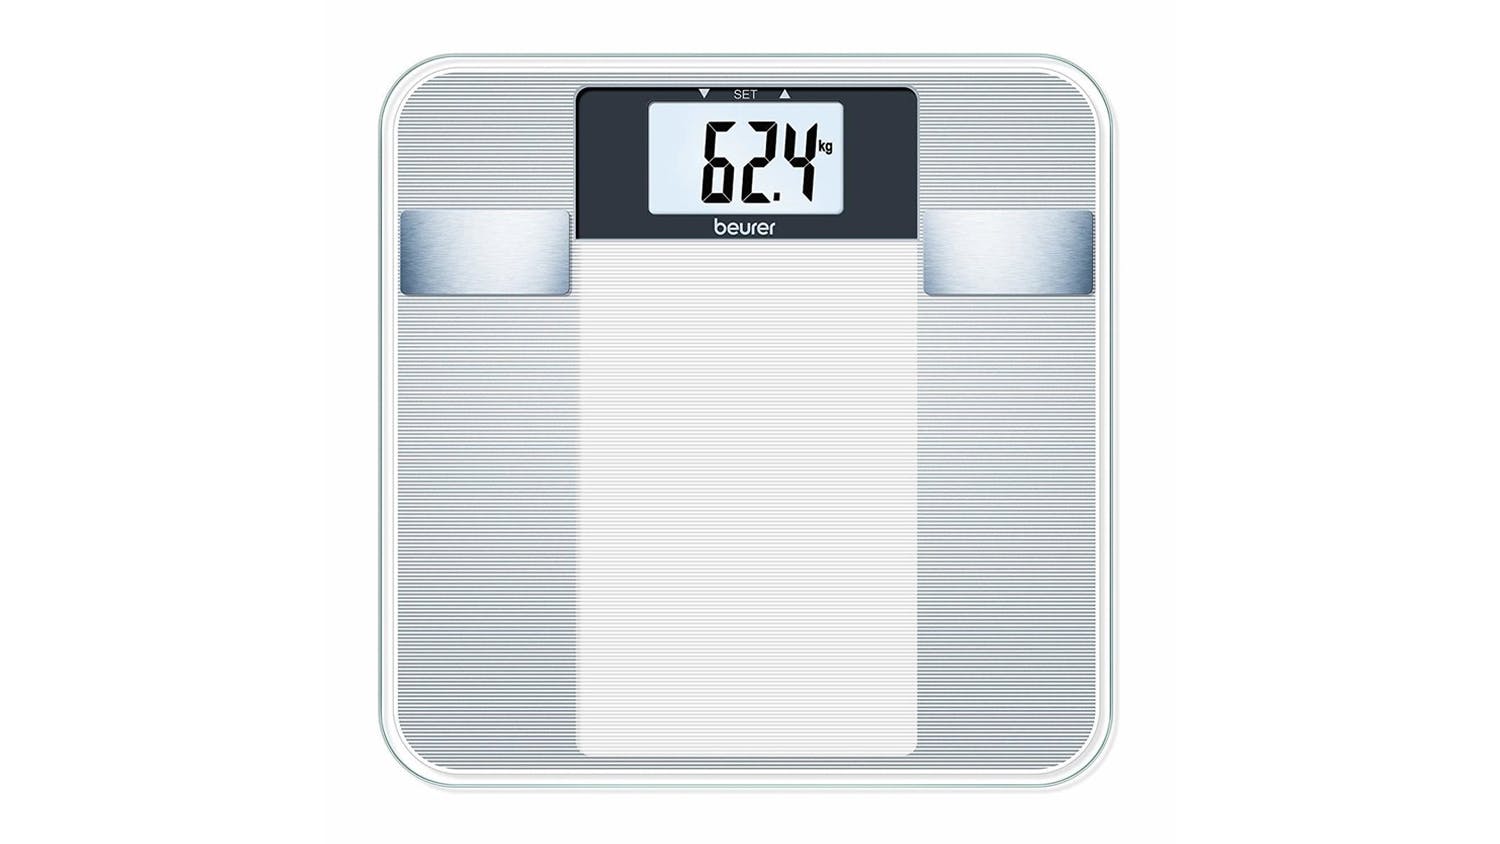 Beurer Glass Body Analysis Scale Measures Weight, Fat, Water and